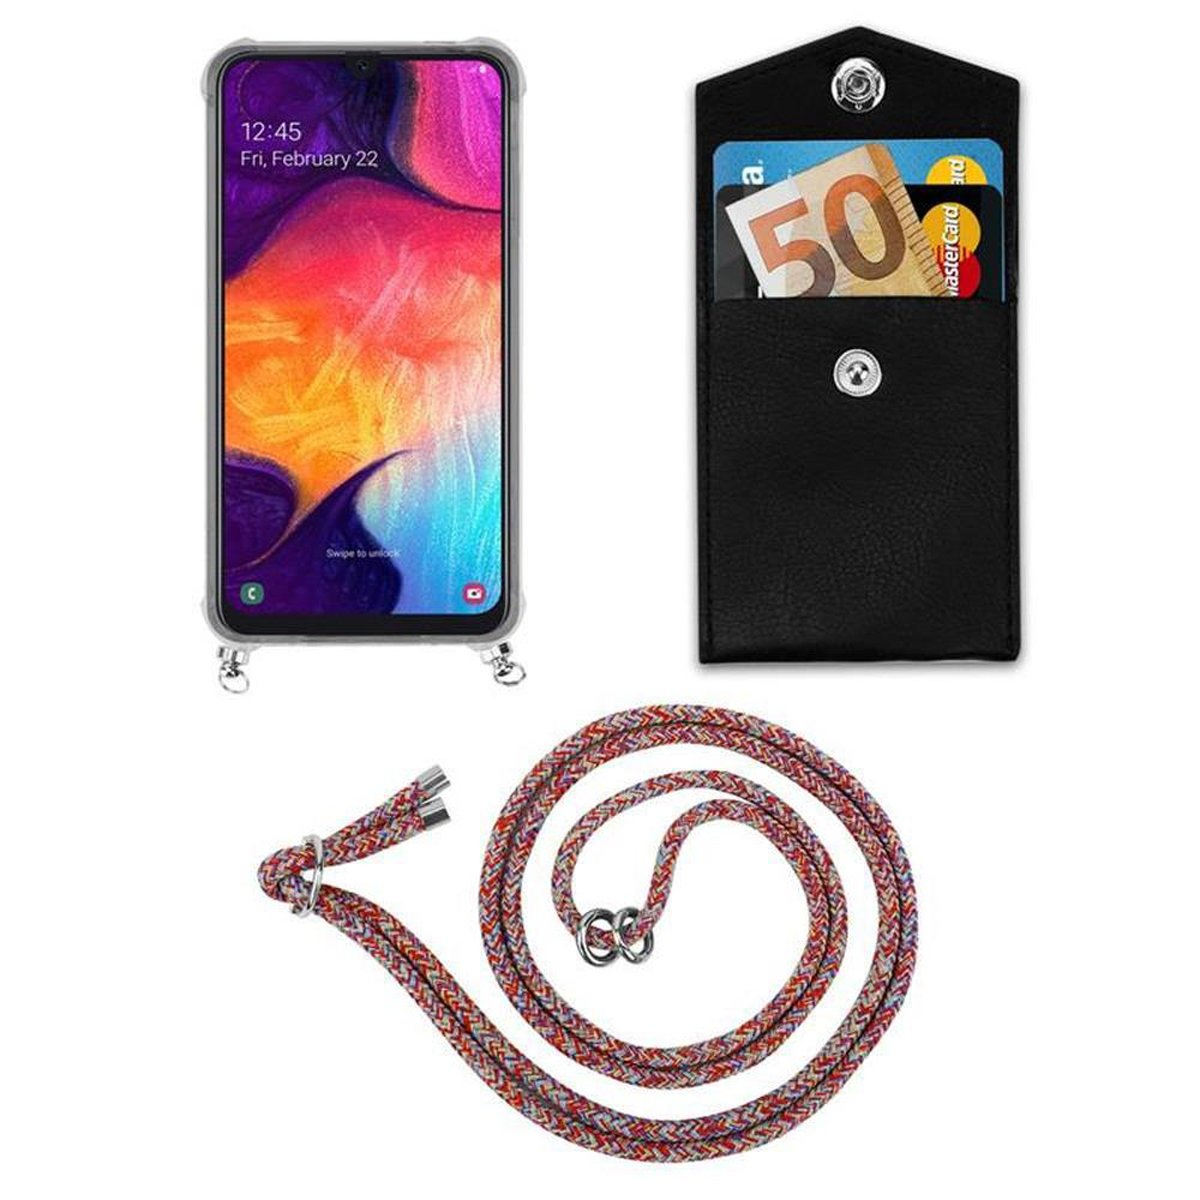 Galaxy A50 4G A30s, / Handy und Silber / Ringen, Samsung, CADORABO Band Kette Kordel Backcover, COLORFUL A50s Hülle, abnehmbarer mit PARROT